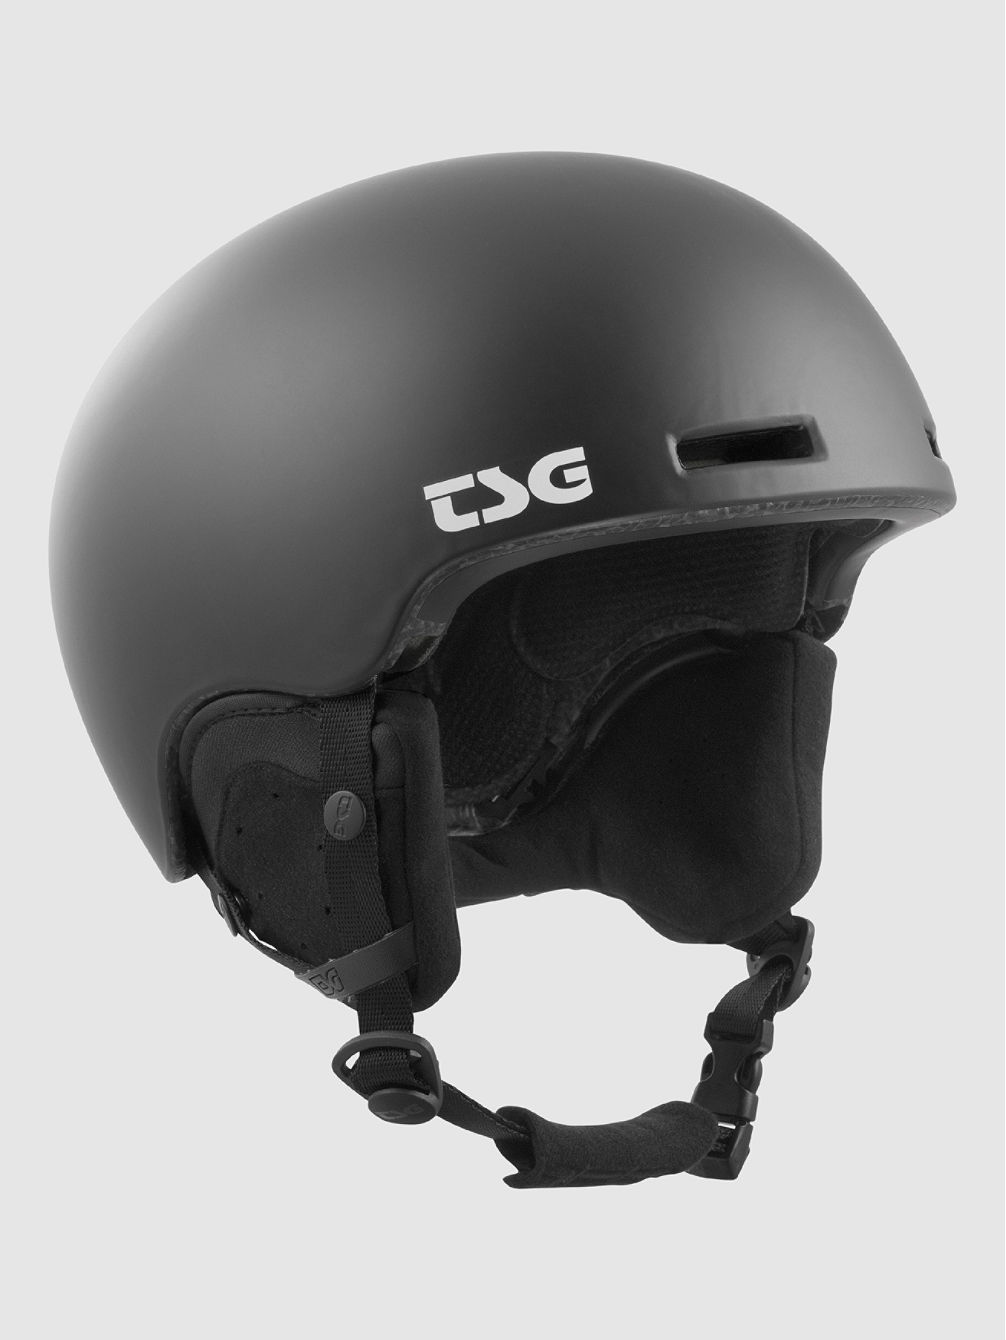 Fly Solid Color Helmet